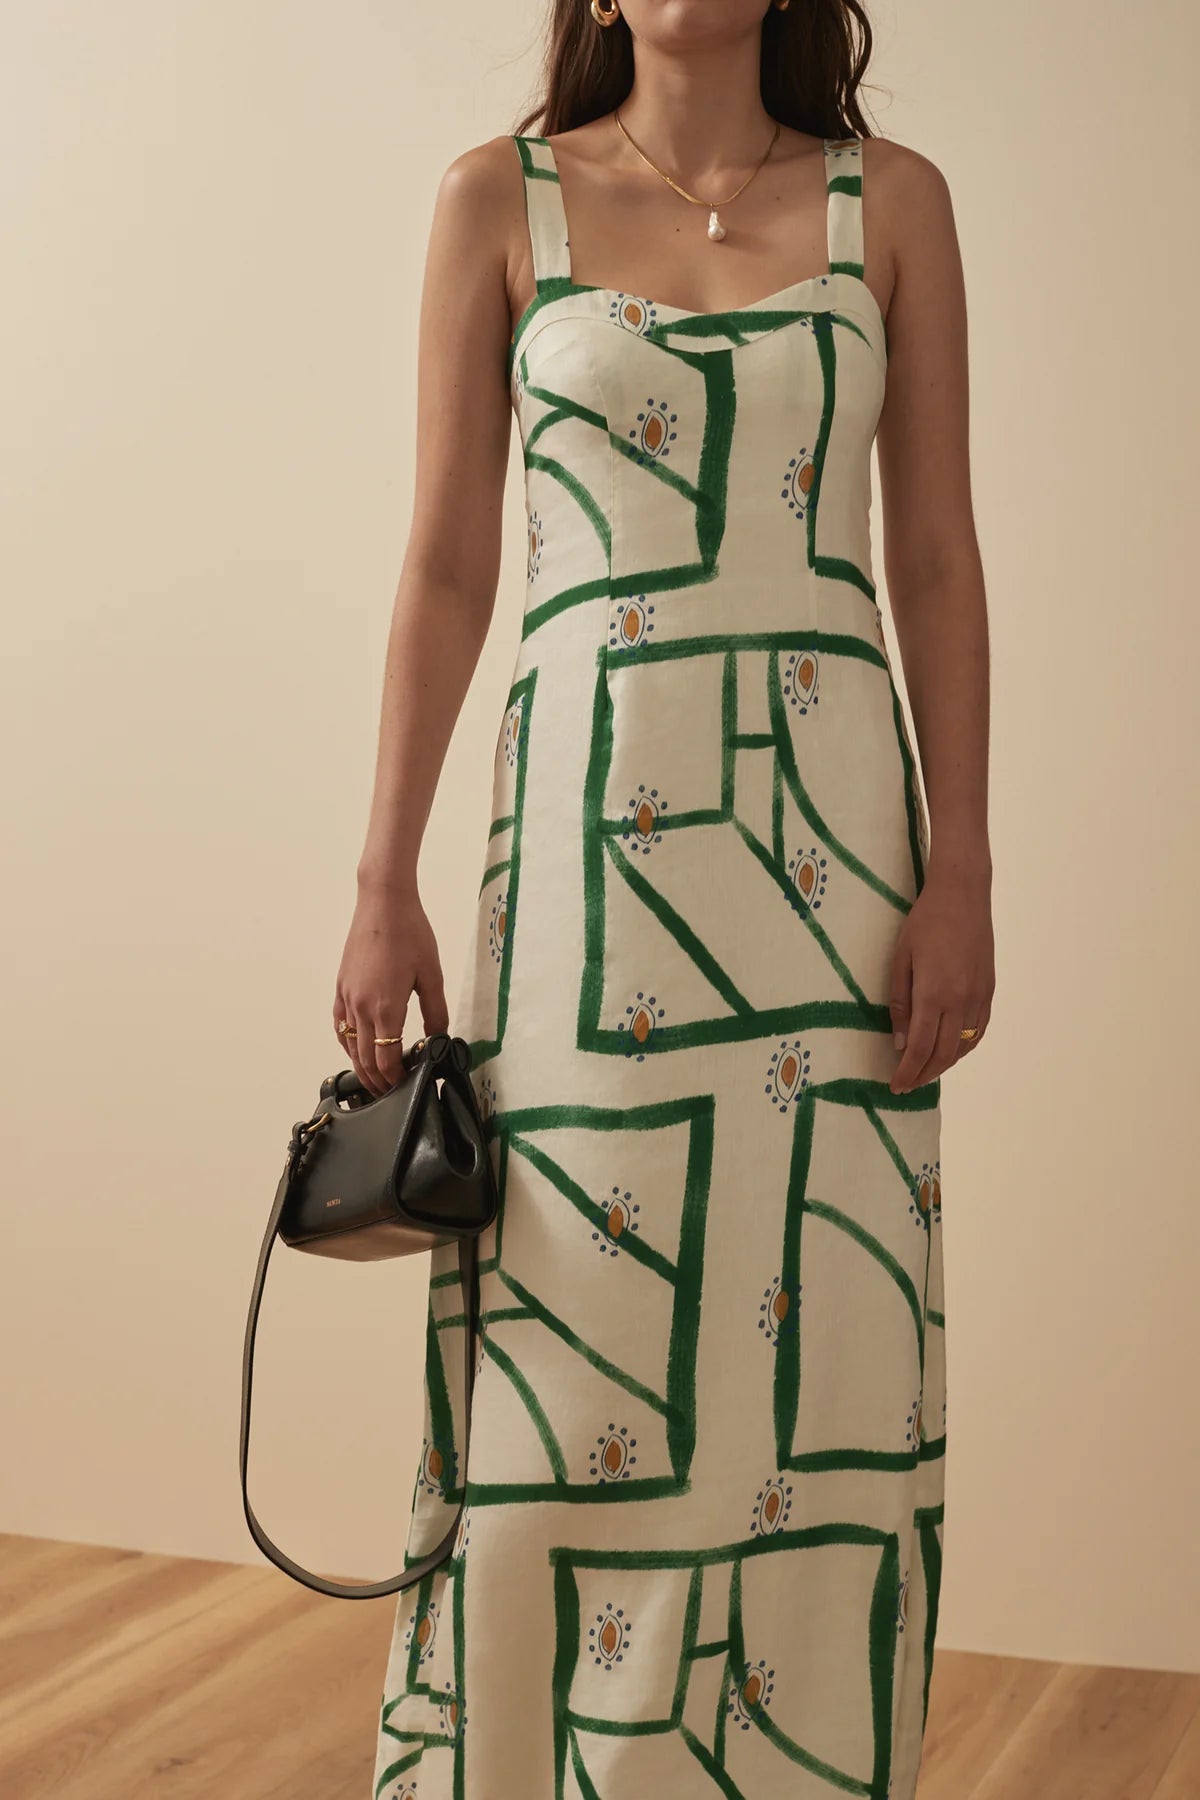 White sleeveless summer dress with a green print